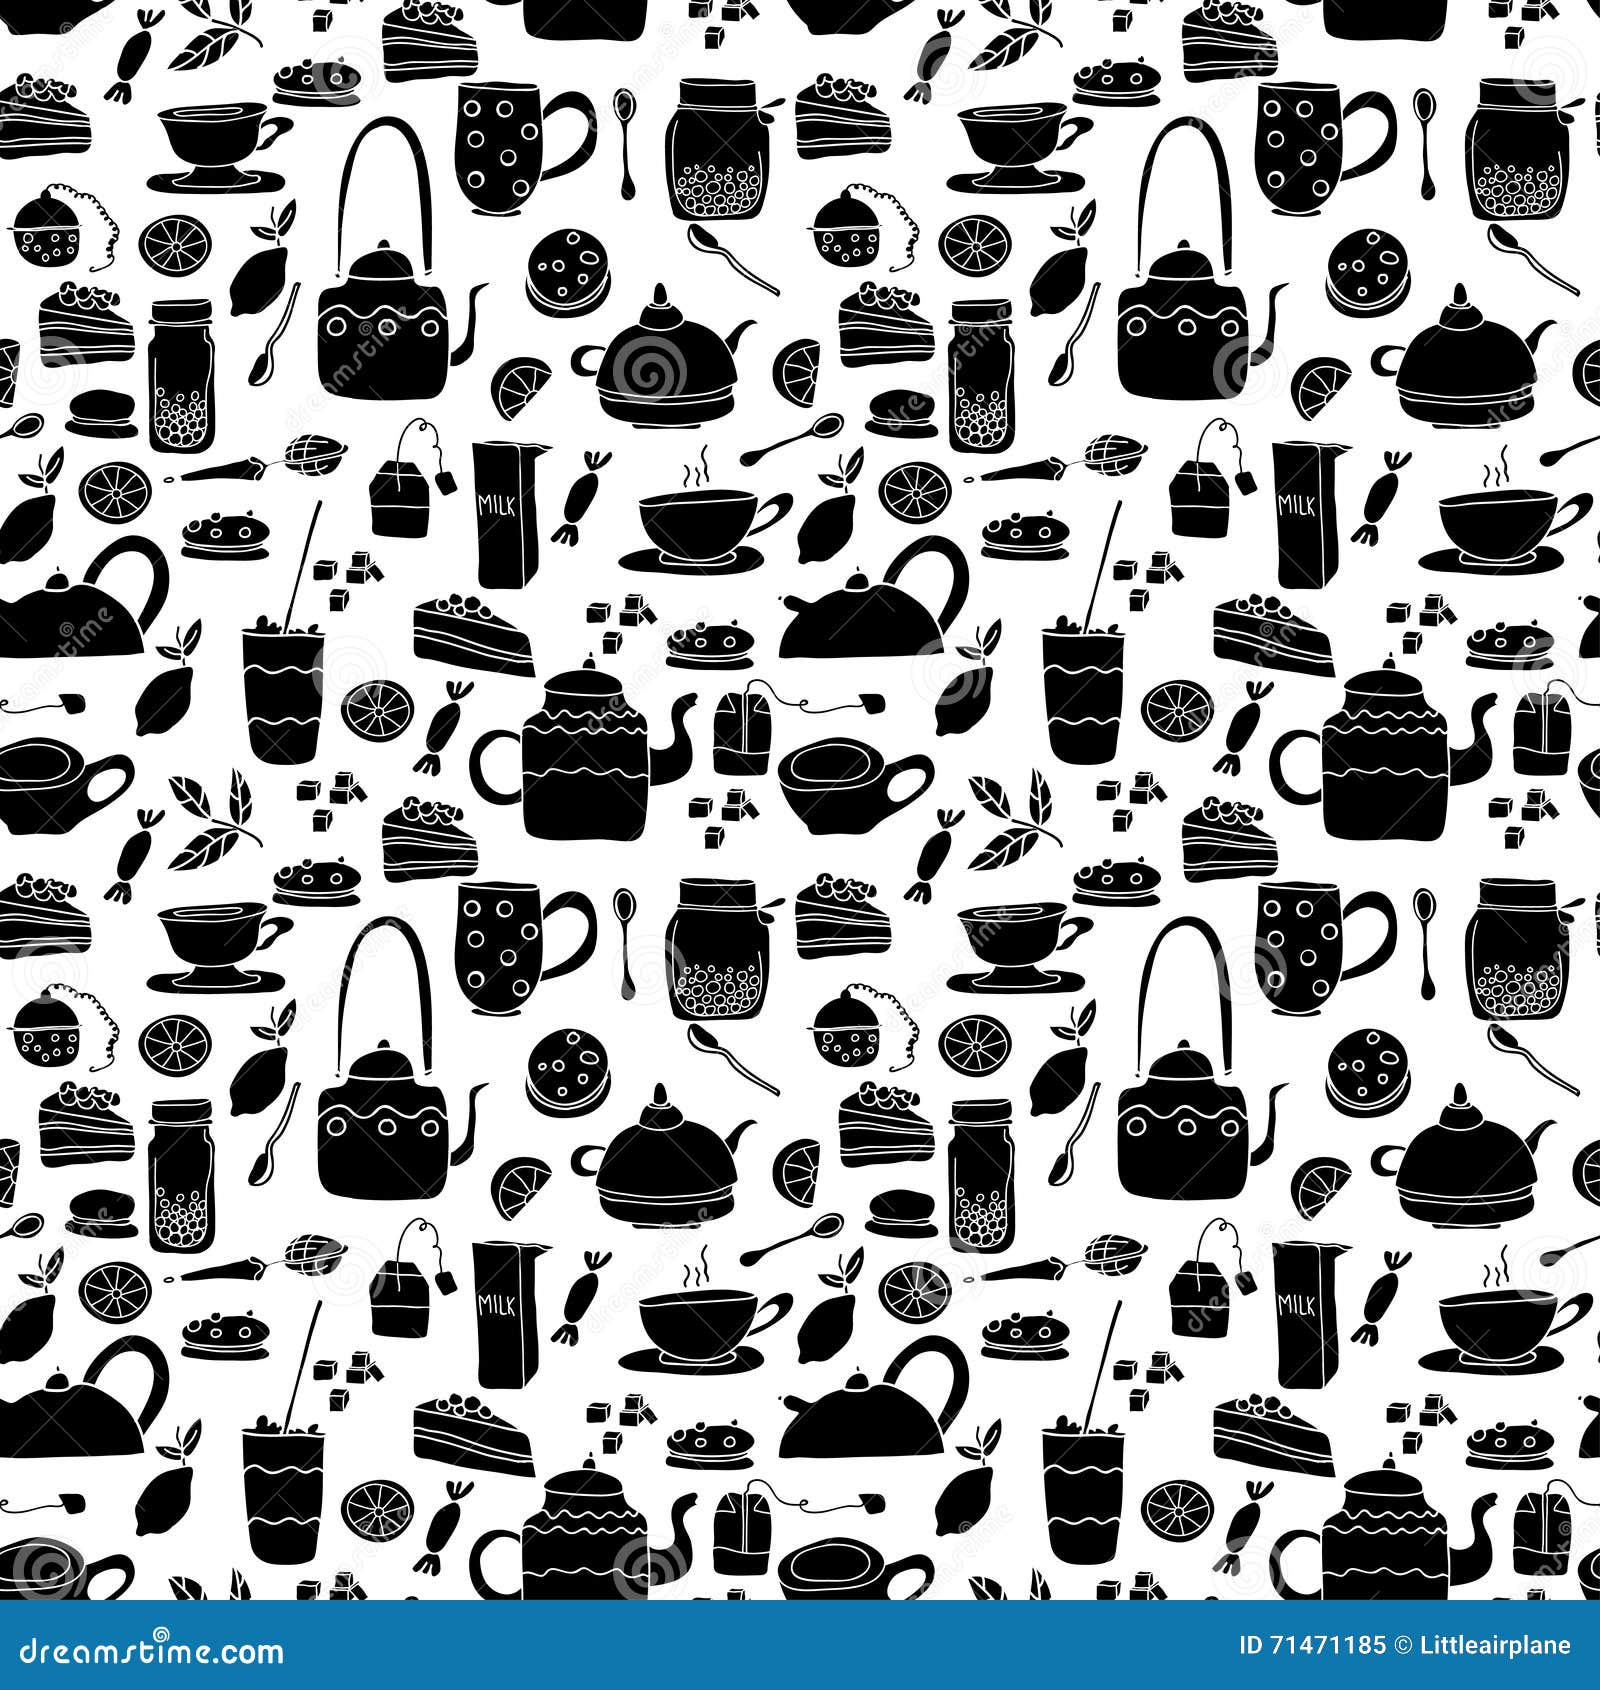 Tea pattern set bnw stock vector. Illustration of collection - 71471185